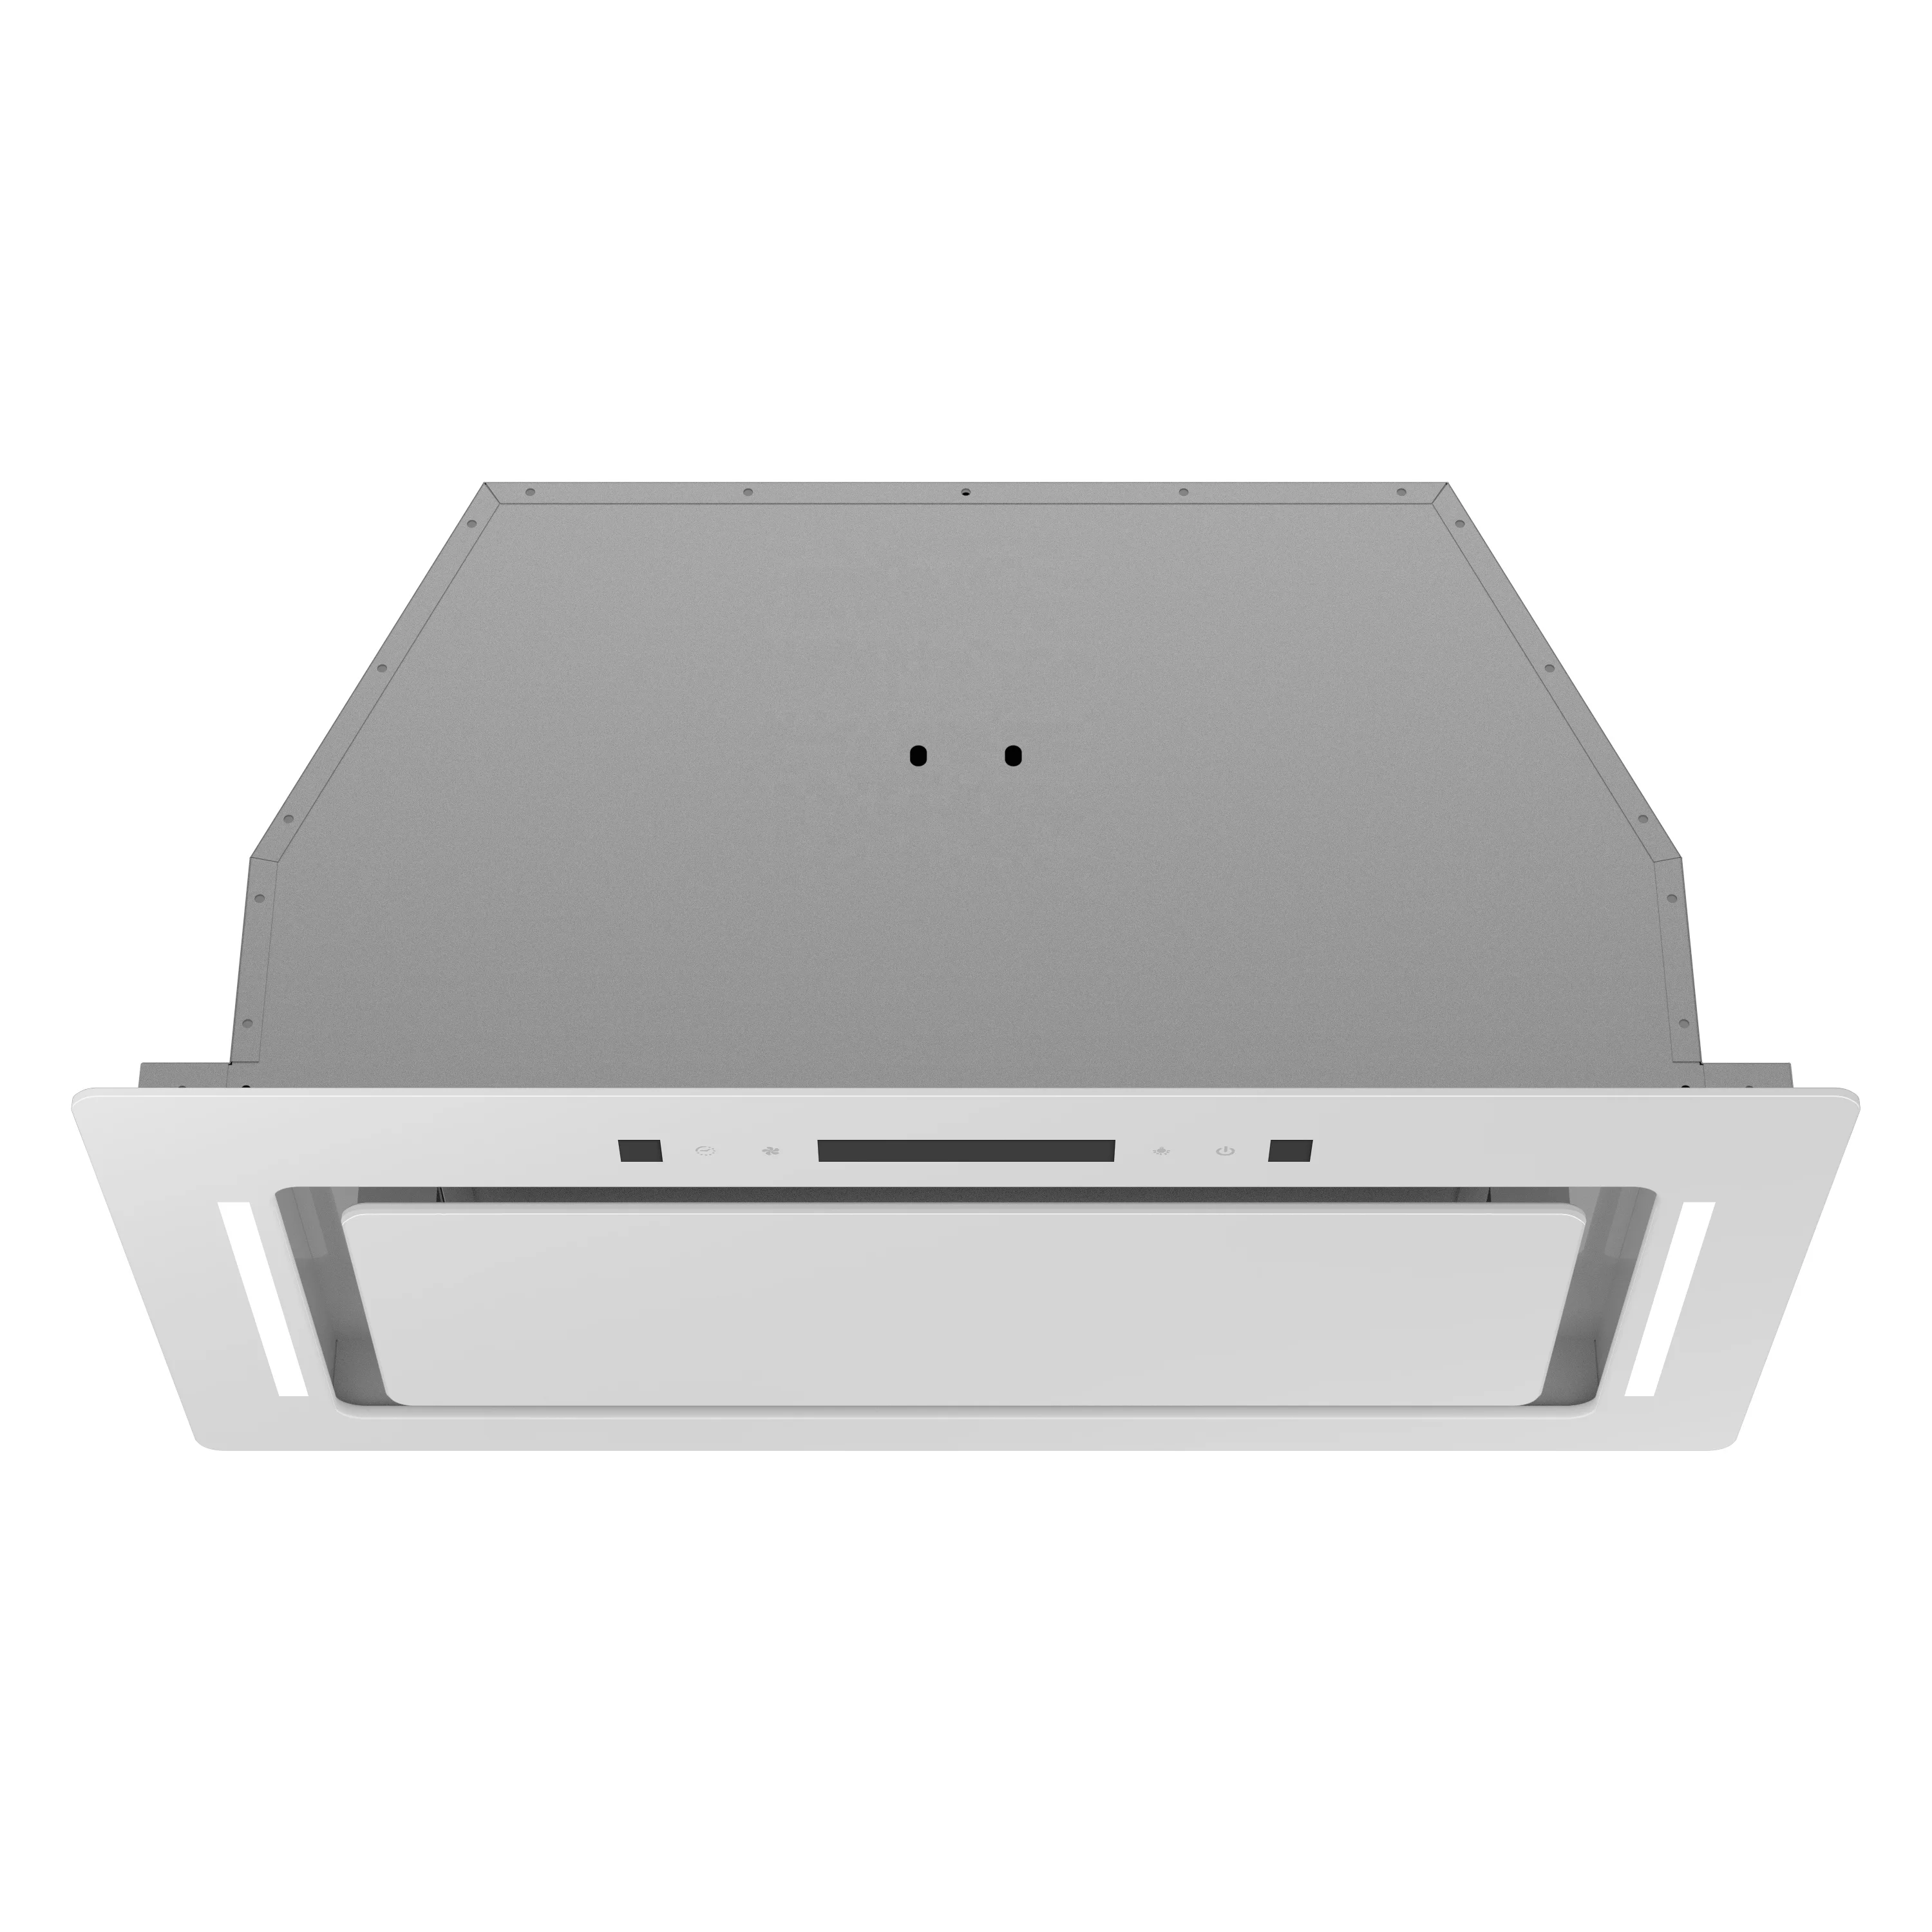 Built-In CB CE Certifications Led Lights Convertible Ducted Ductless Insert Hidden Kitchen Vent Range Hood